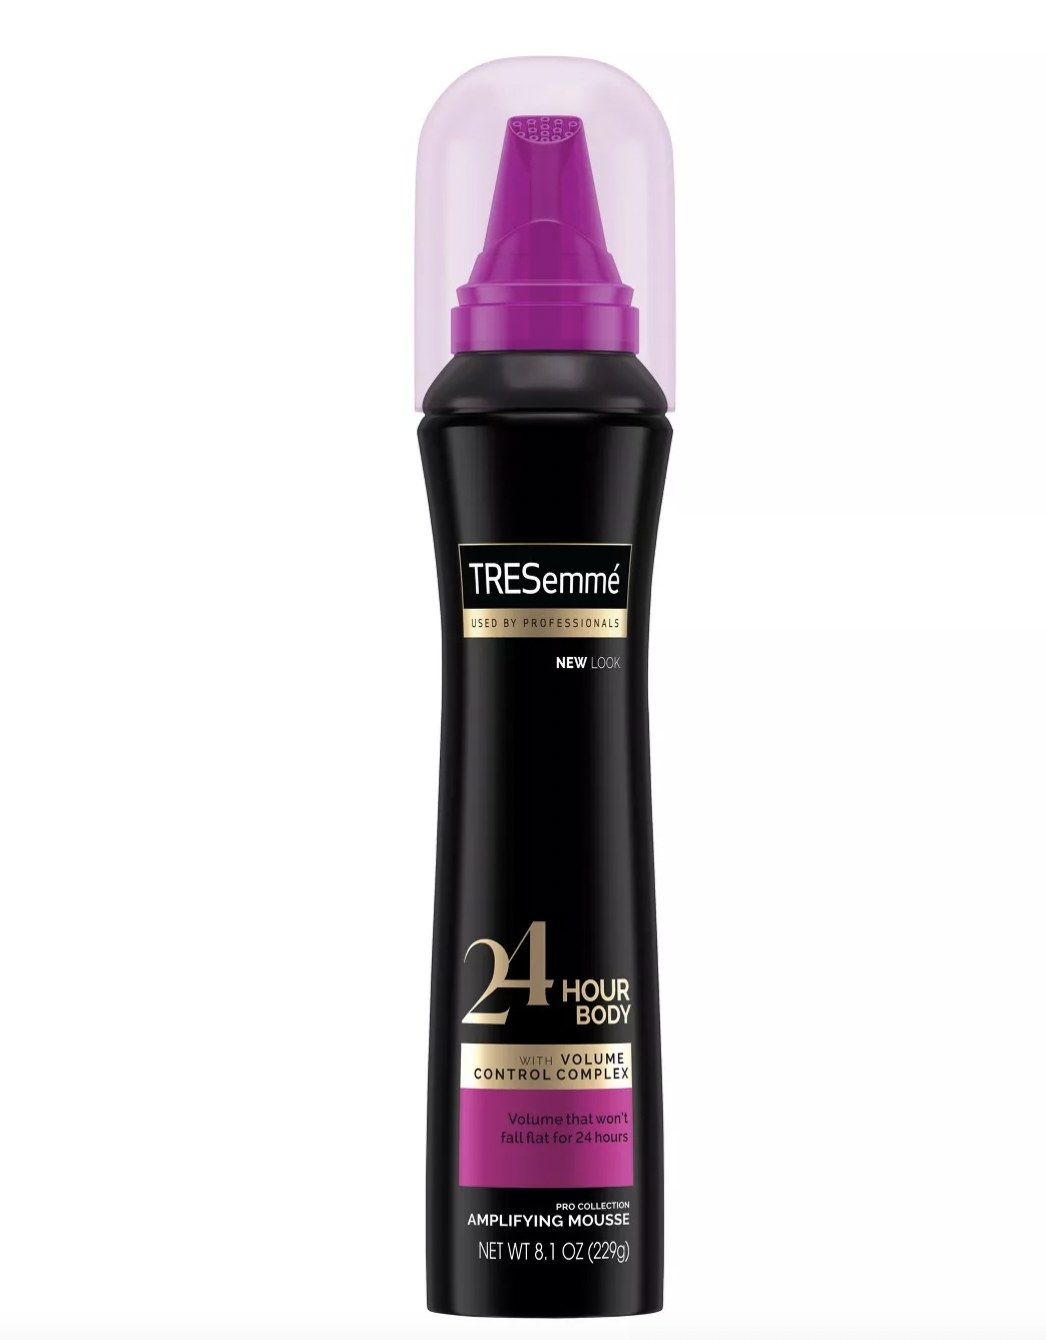 A bottle of hair mousse